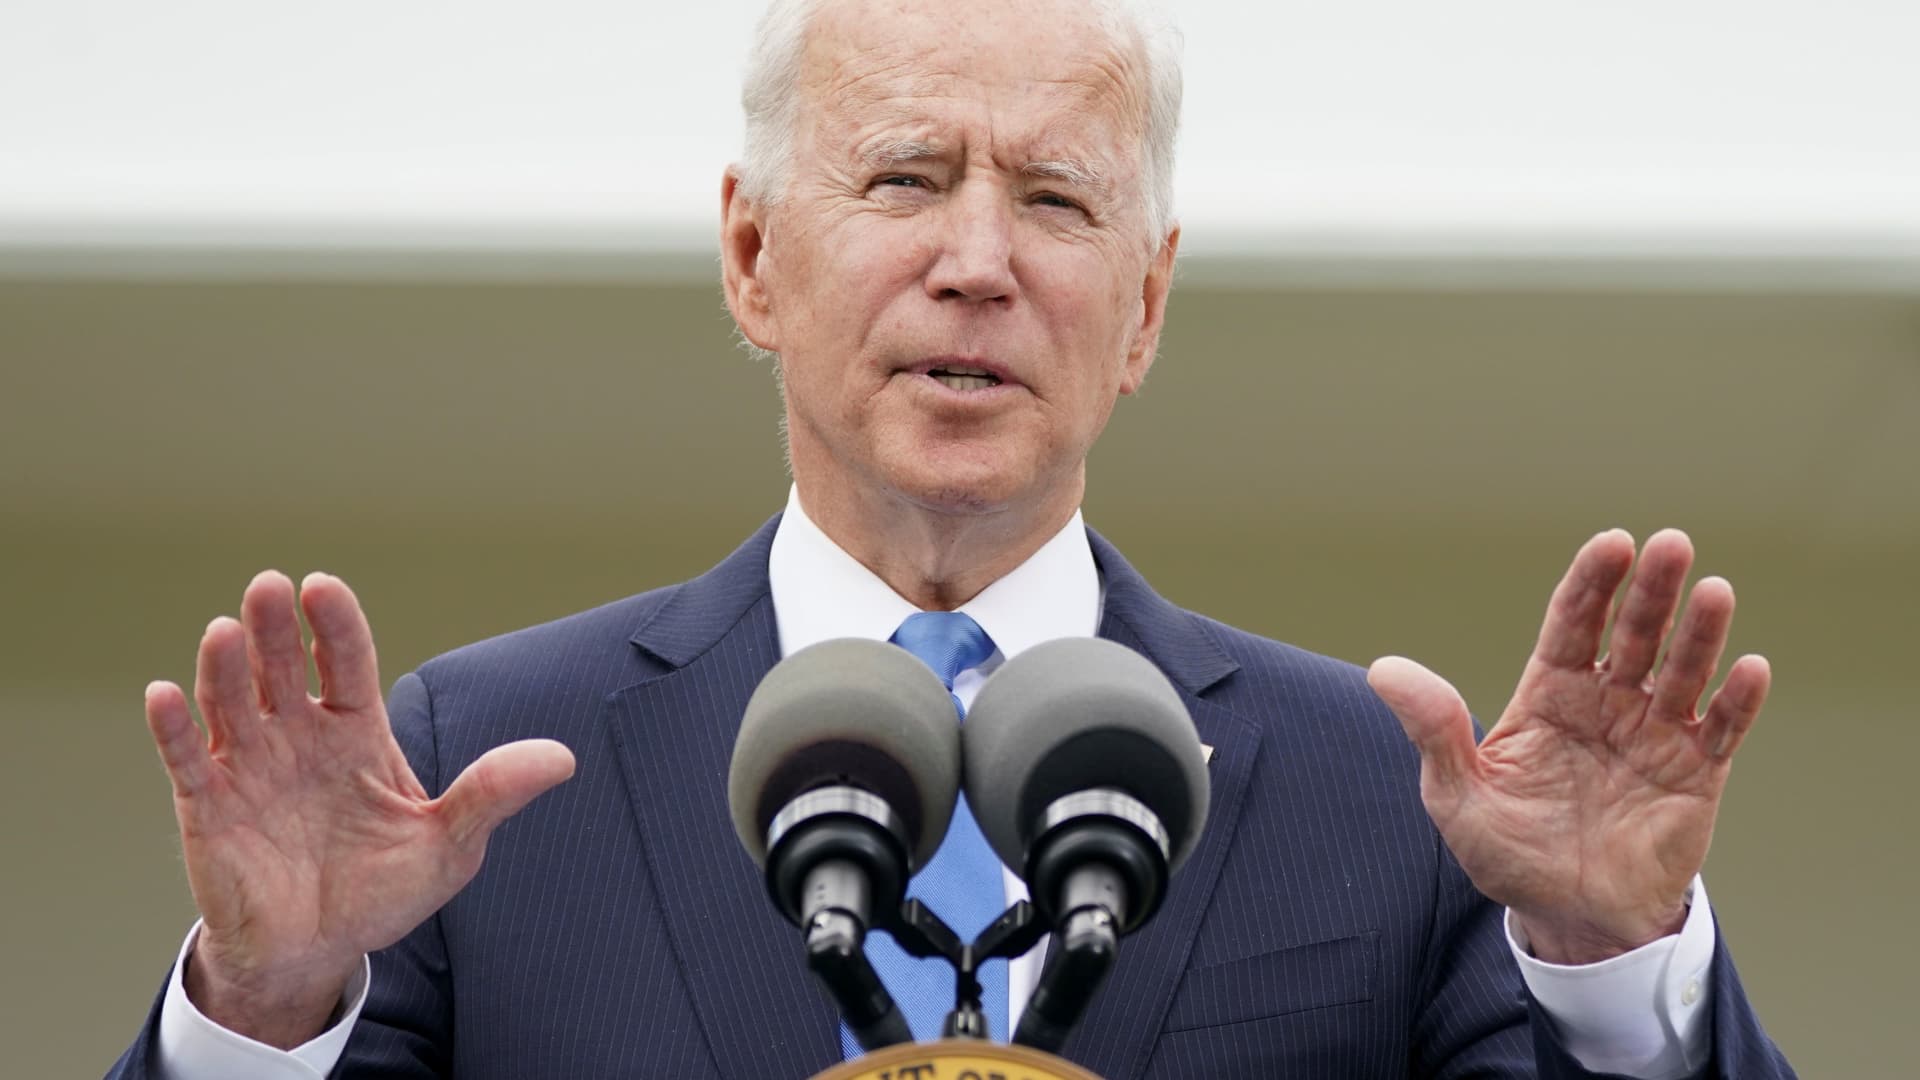 U.S. President Joe Biden speaks about the coronavirus disease (COVID-19) response and the vaccination program from the Rose Garden of the White House in Washington, May 13, 2021.